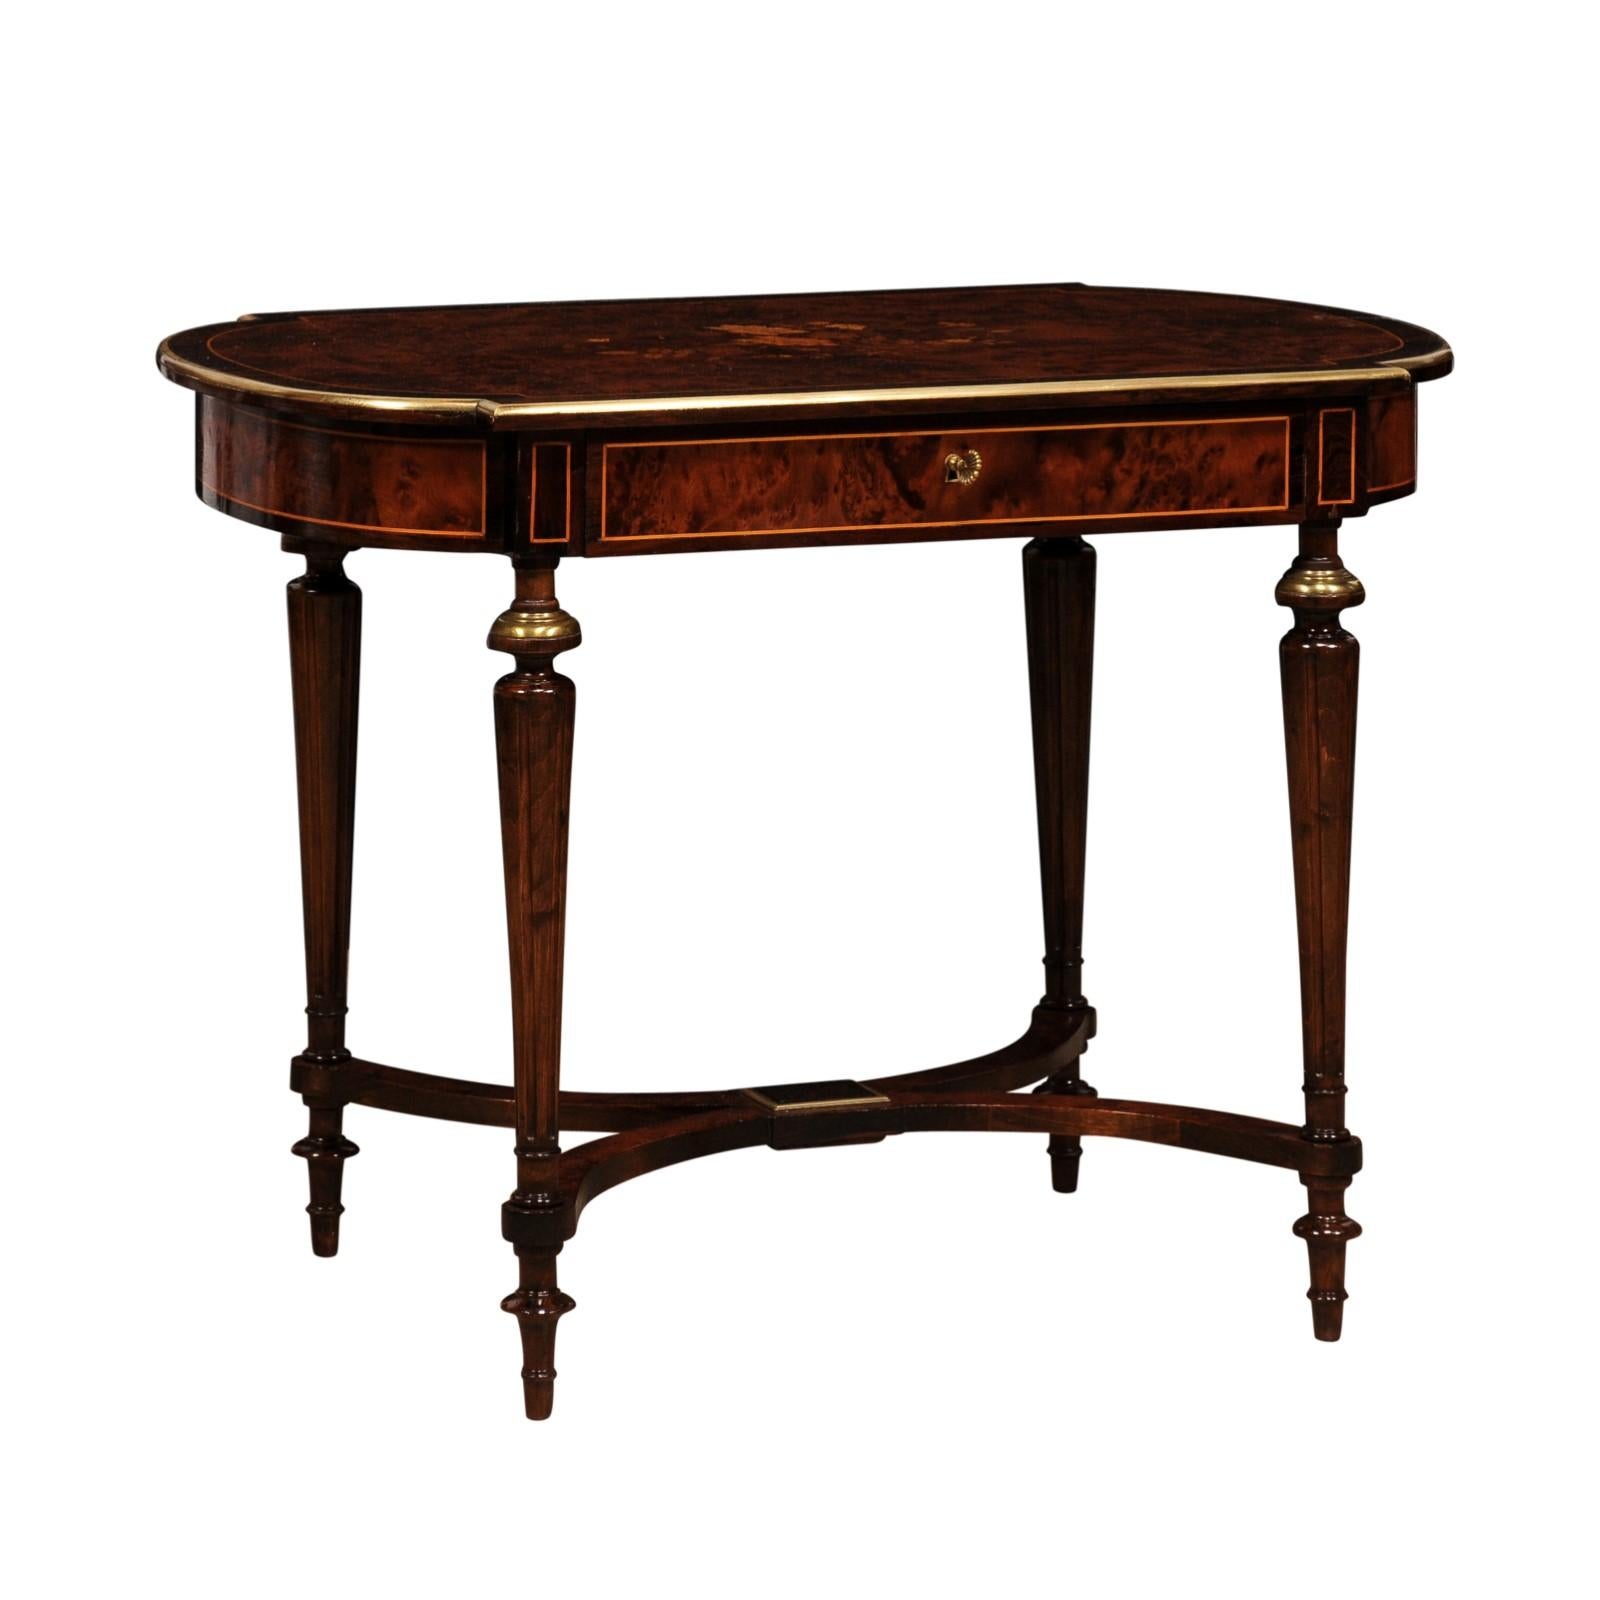 An Italian walnut and mahogany side table from circa 1890 with floral marquetry at the top, brass trim, single drawer, fluted tapering legs and X-Form cross stretcher. Discover the quintessence of Italian craftsmanship in this splendid walnut and